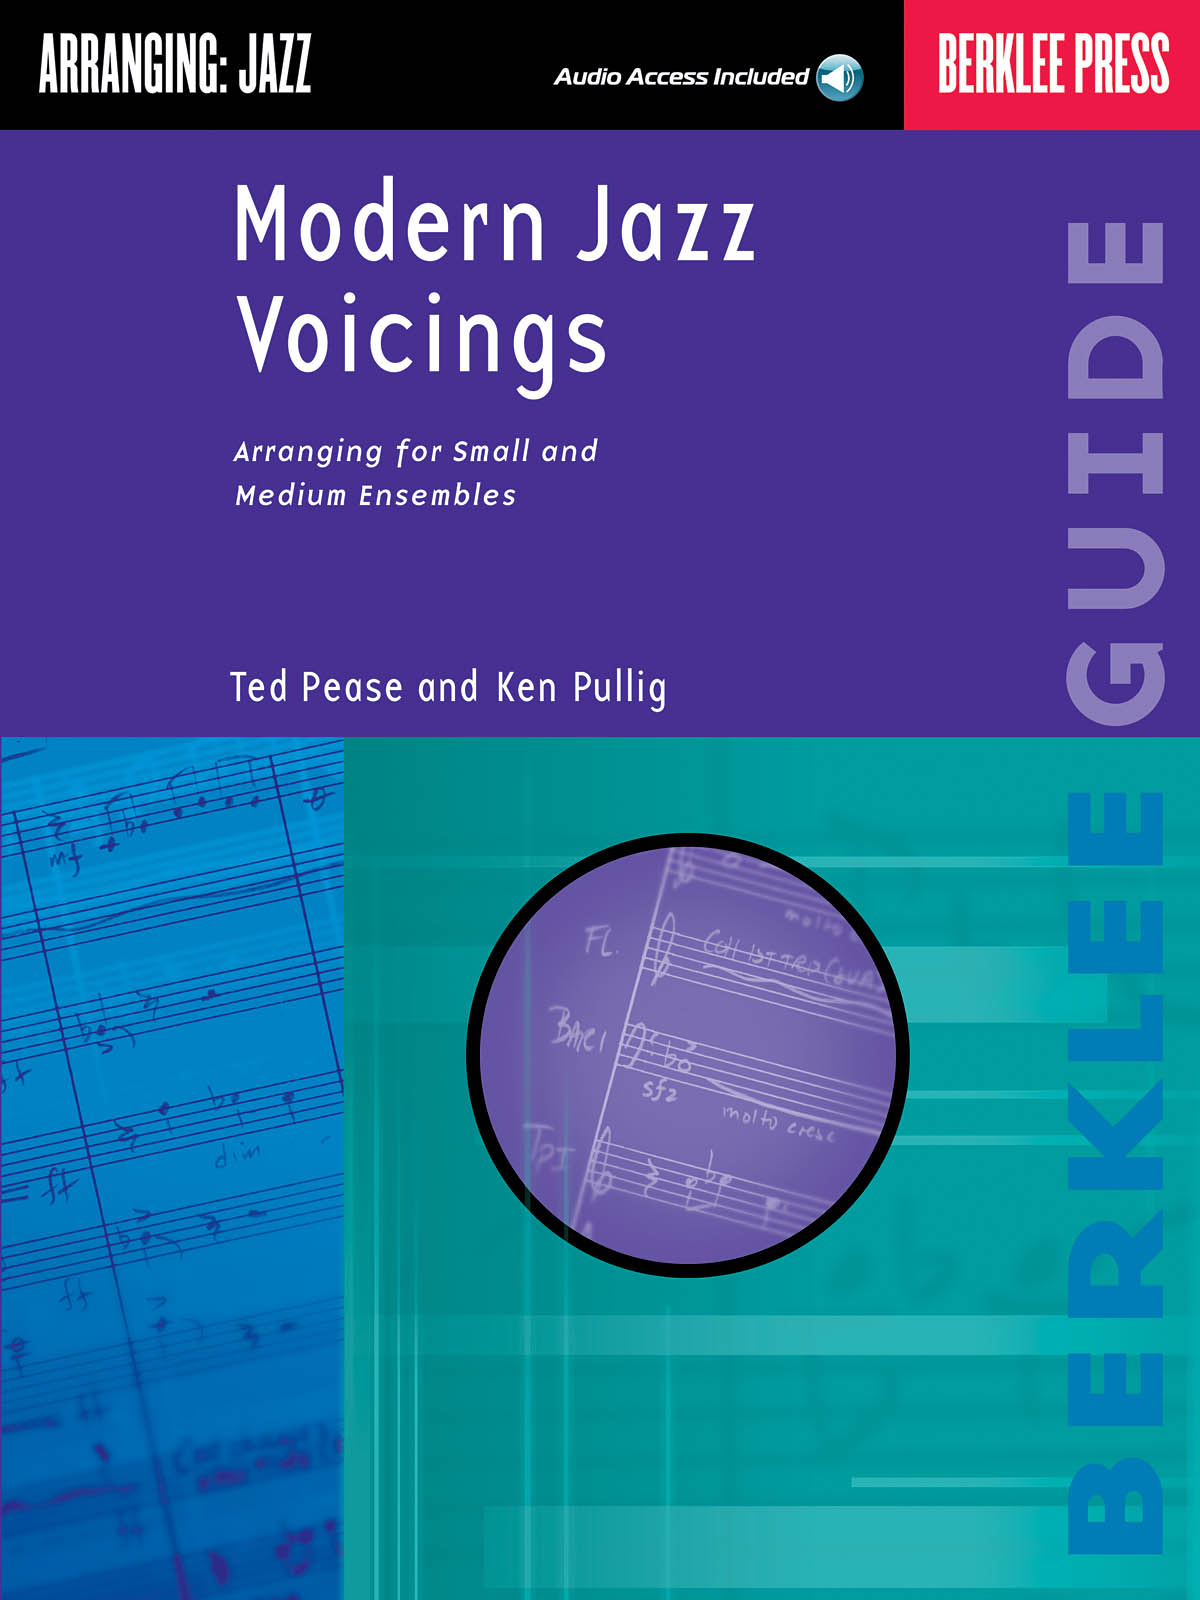 Modern Jazz Voicings - Arranging for Small and Medium Ensembles - noty pro orchestr